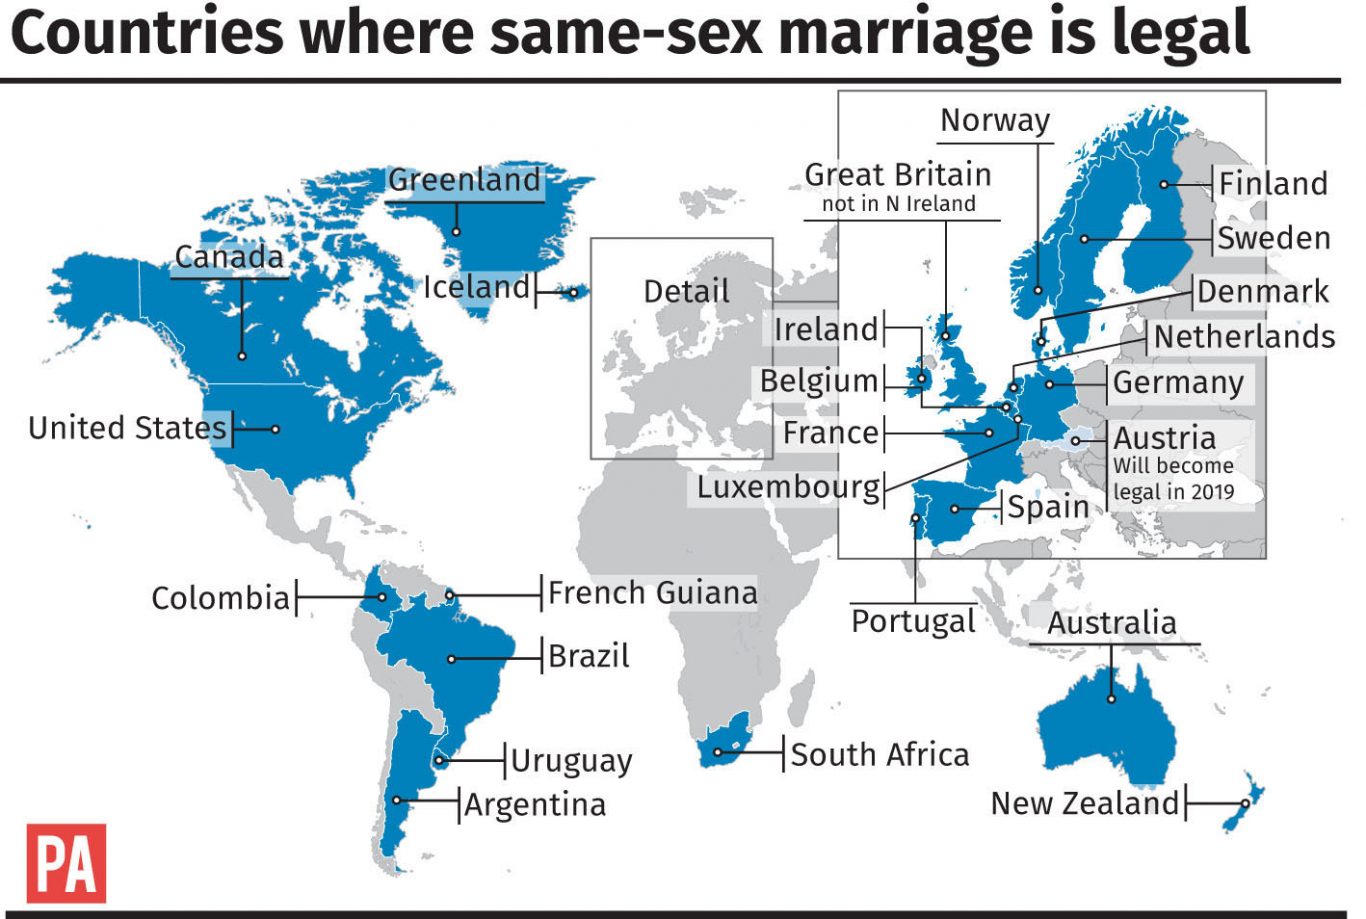 Countries where same-sex marriage is legal